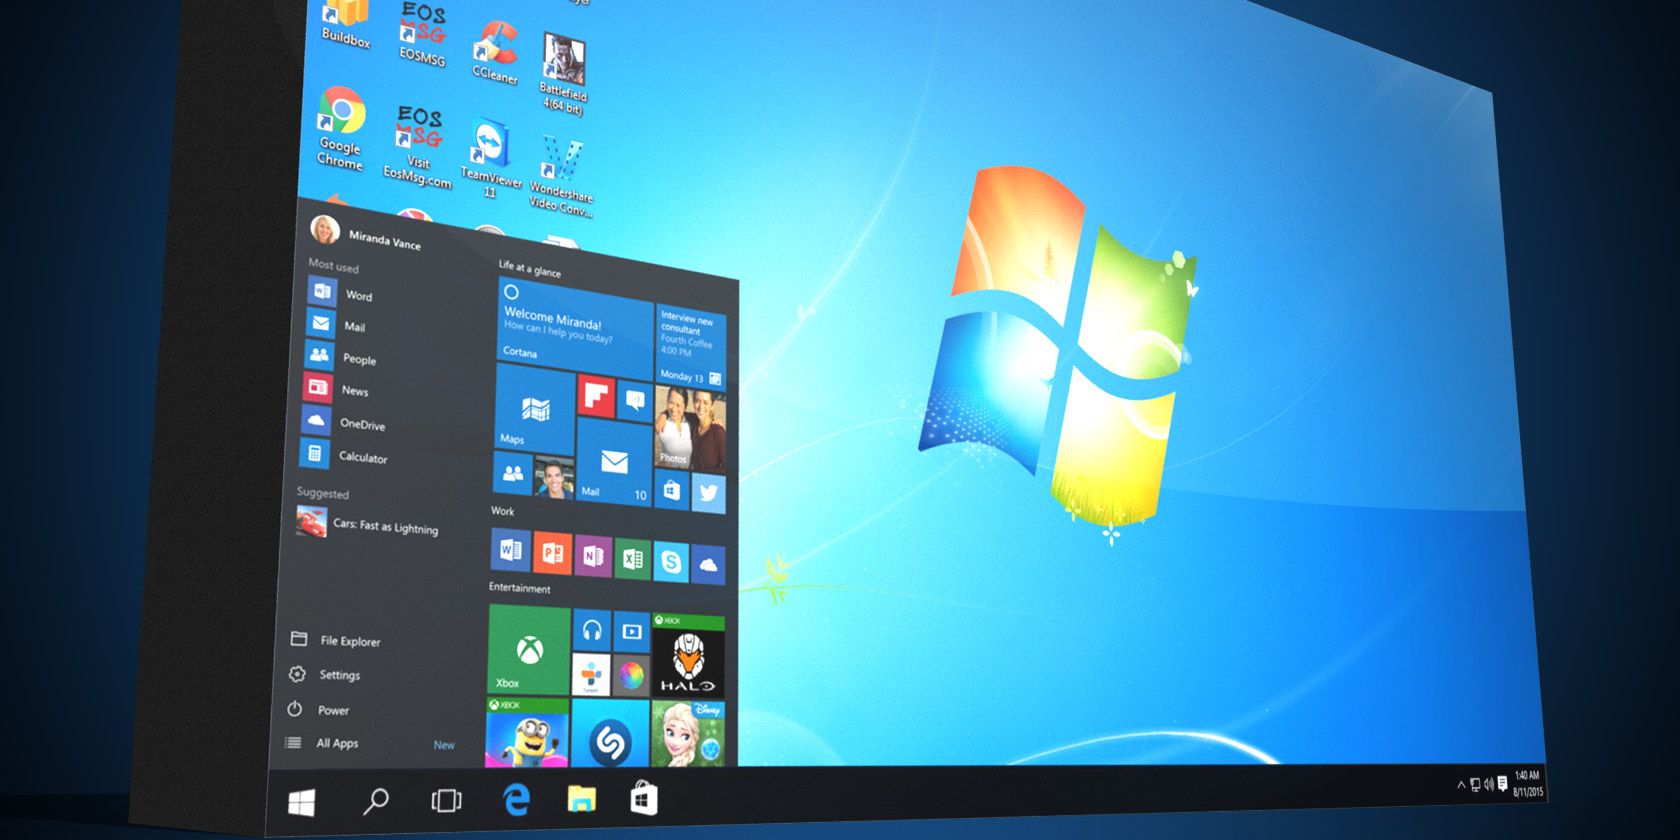 how to move icons in windows 7 emulator for windows 8.1